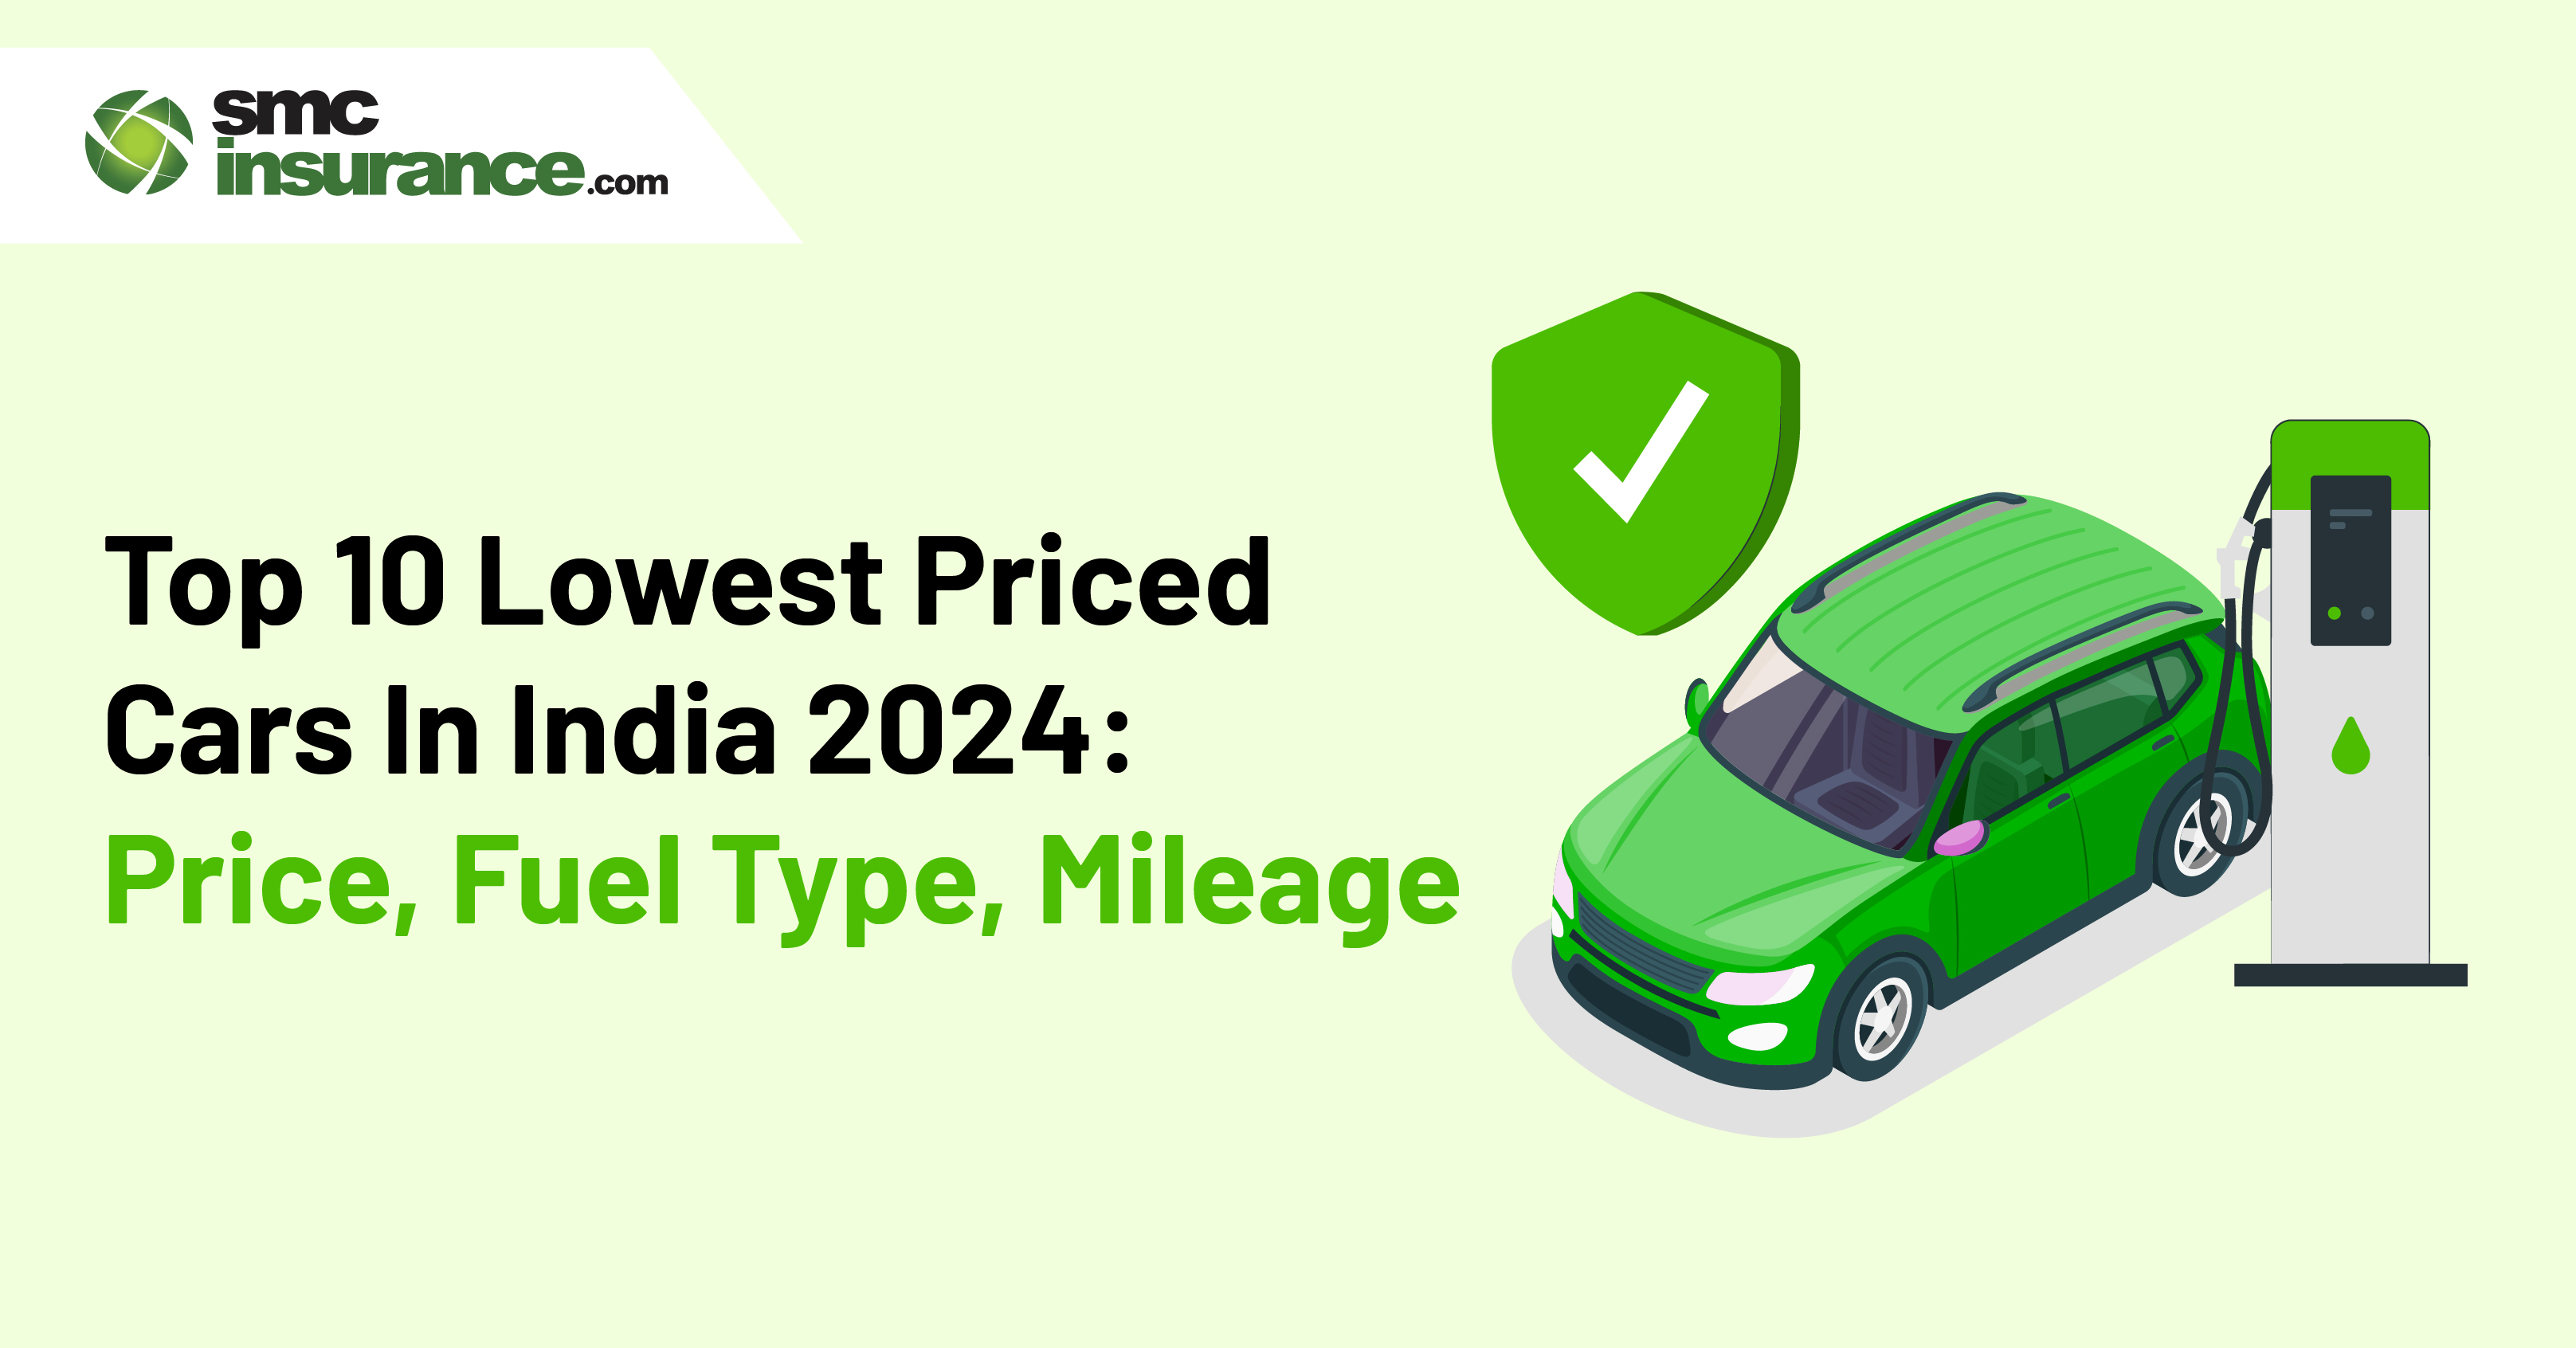 Top 10 Lowest Priced Cars In India 2024: Price, Fuel Type, Mileage